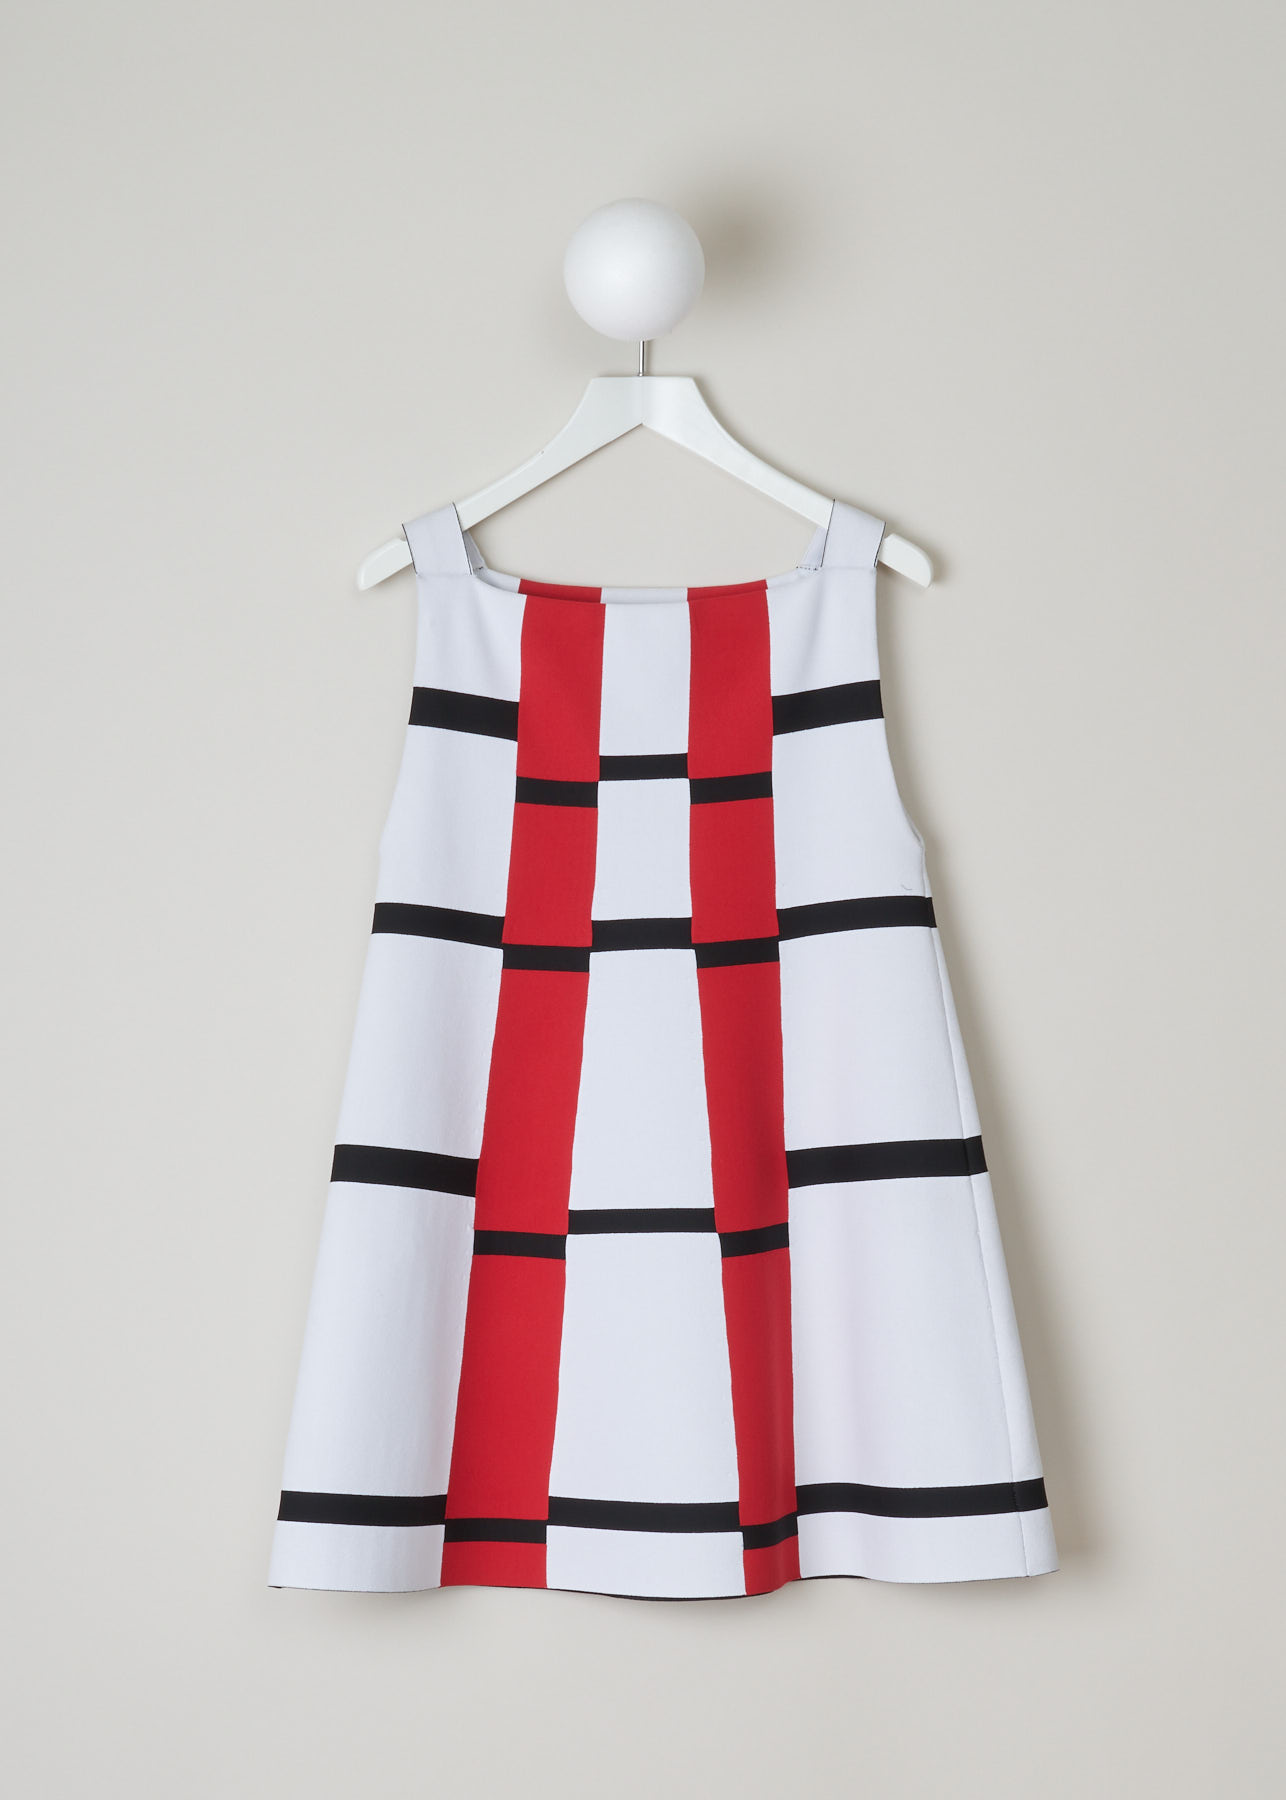 ALAÏA, GEOMETRIC A-LINE TUNIC, 7E9UE24LM327_tunique_sm_mirage_CM00_multico00, Print, White, Red, Front, Knitted A-line tunic in sixties style. The dress is made with a graphic patterned fabric in white, red and black. This model has an elegant, straight neckline, is a slip-on without zip and buttons and come in right under the knee.
